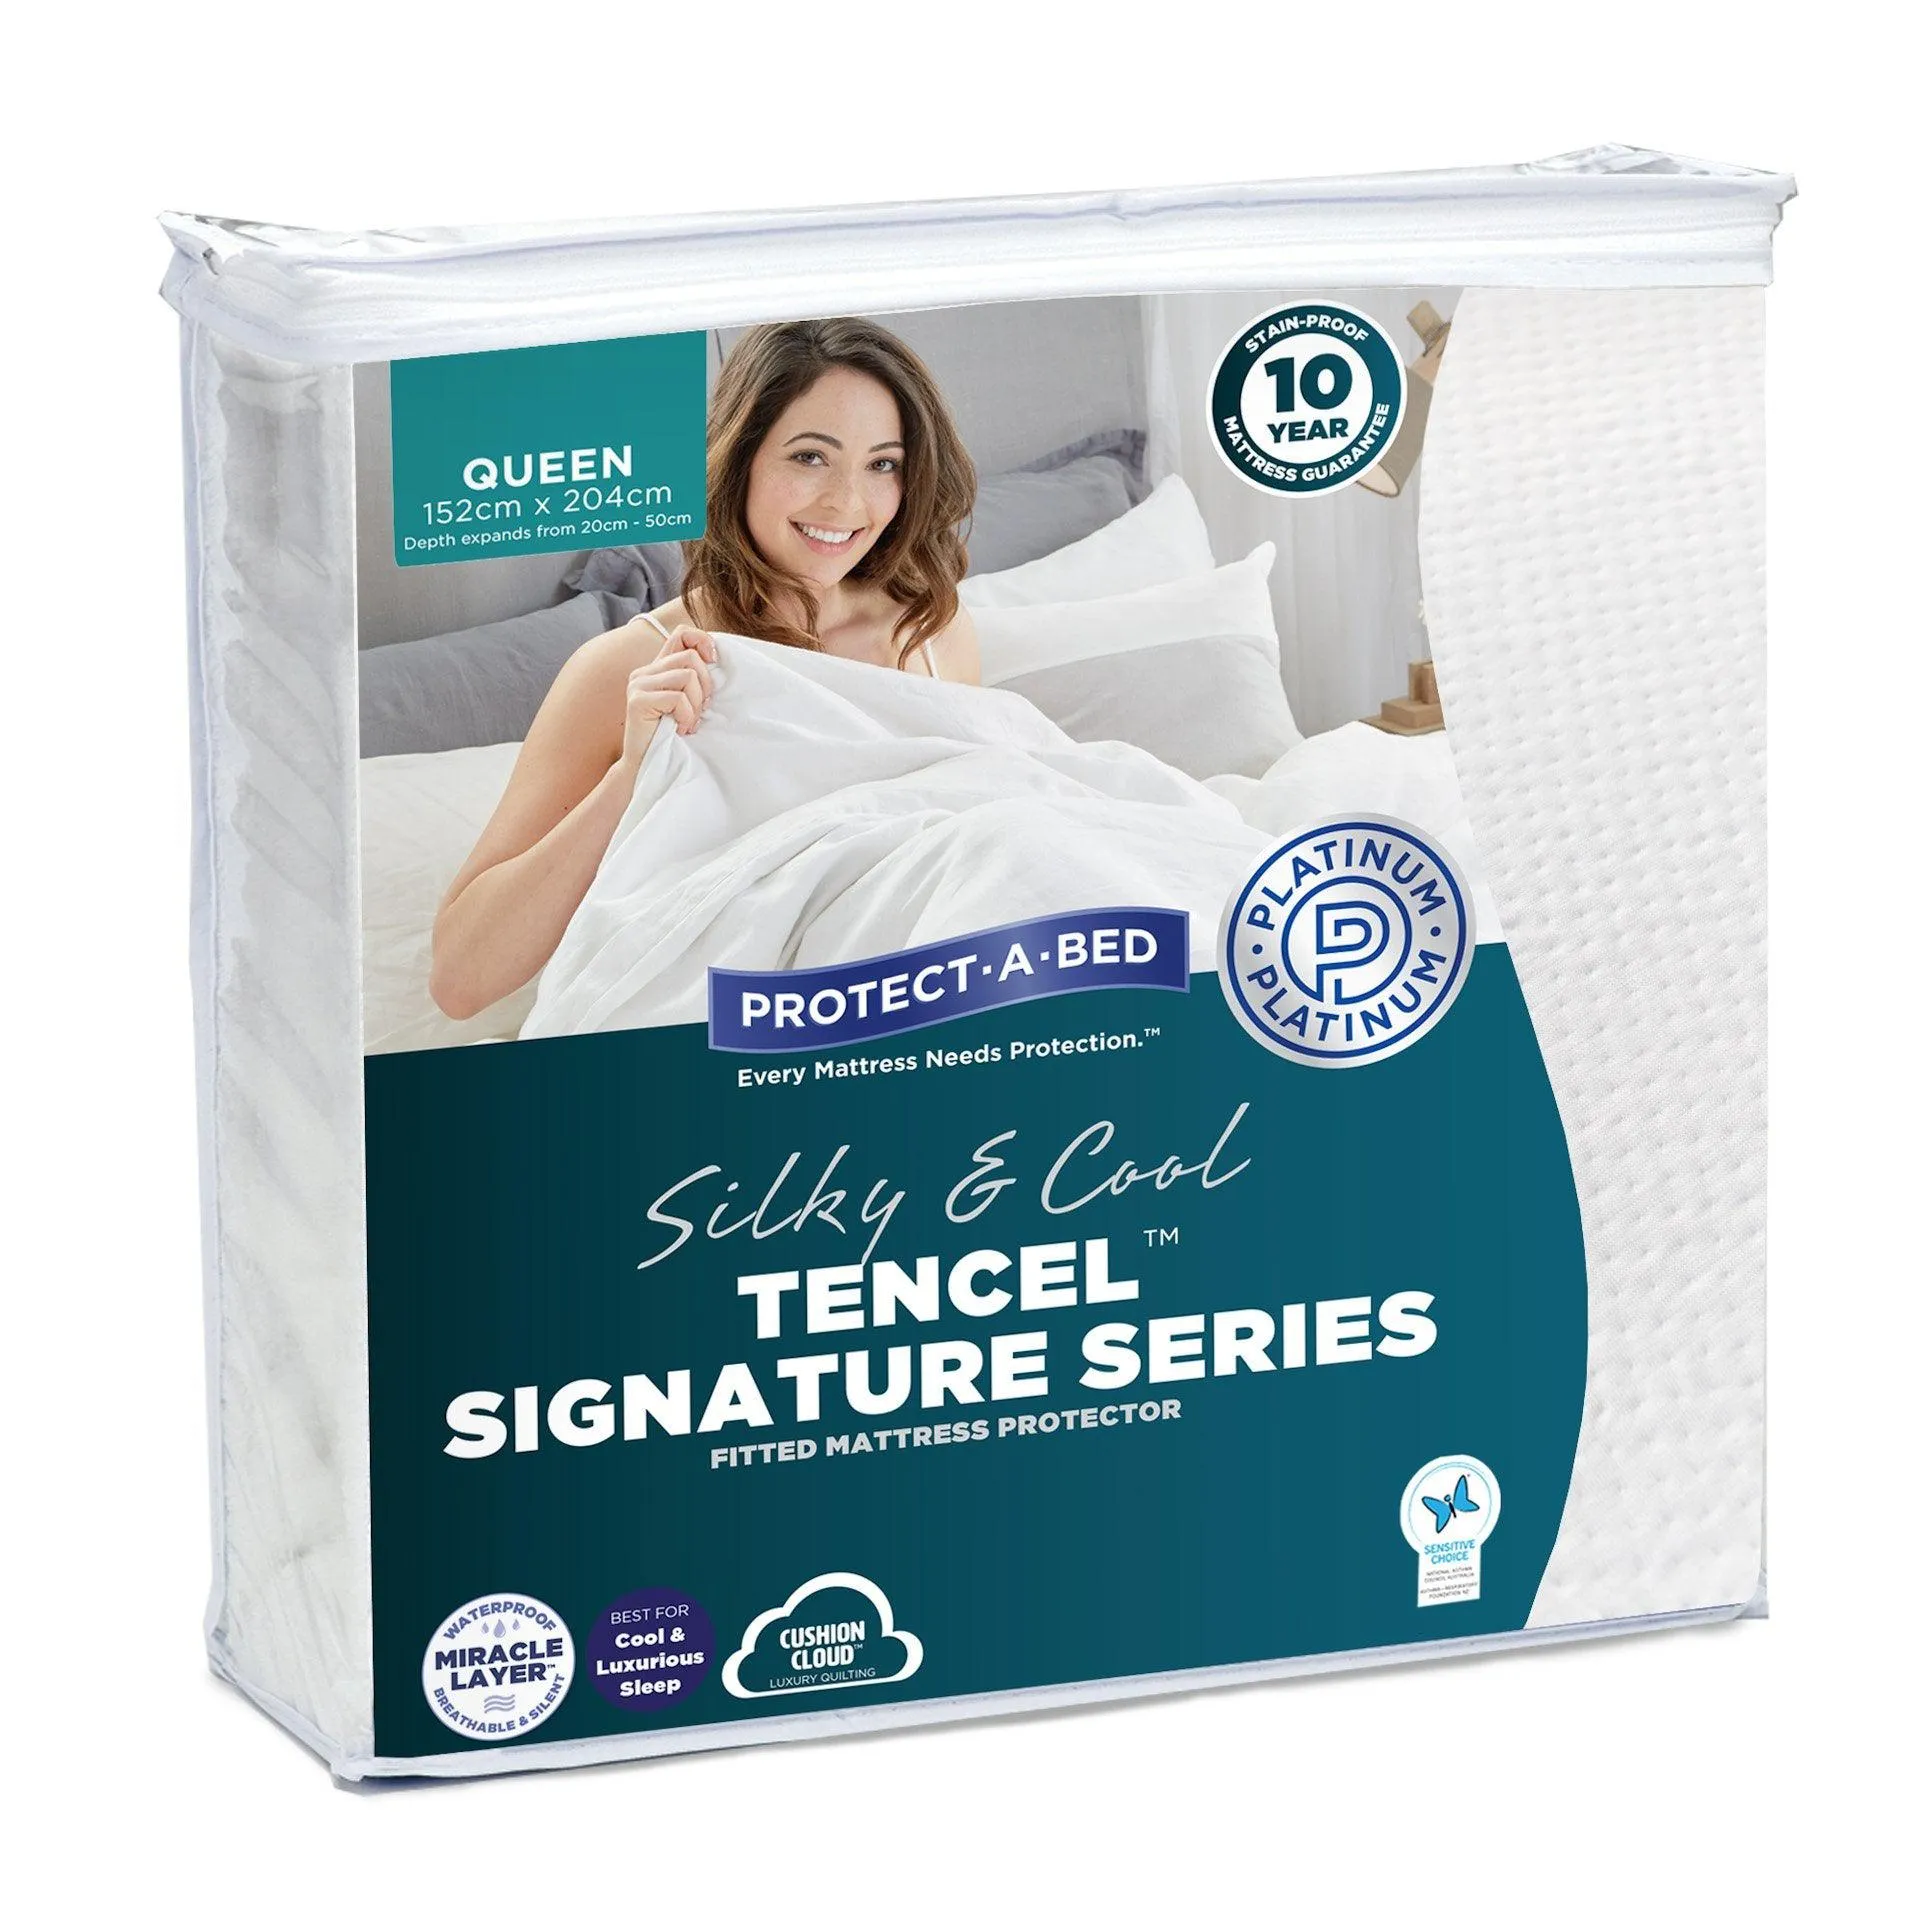 Protect-A-Bed Tencel Signature Series Long Double Mattress Protector